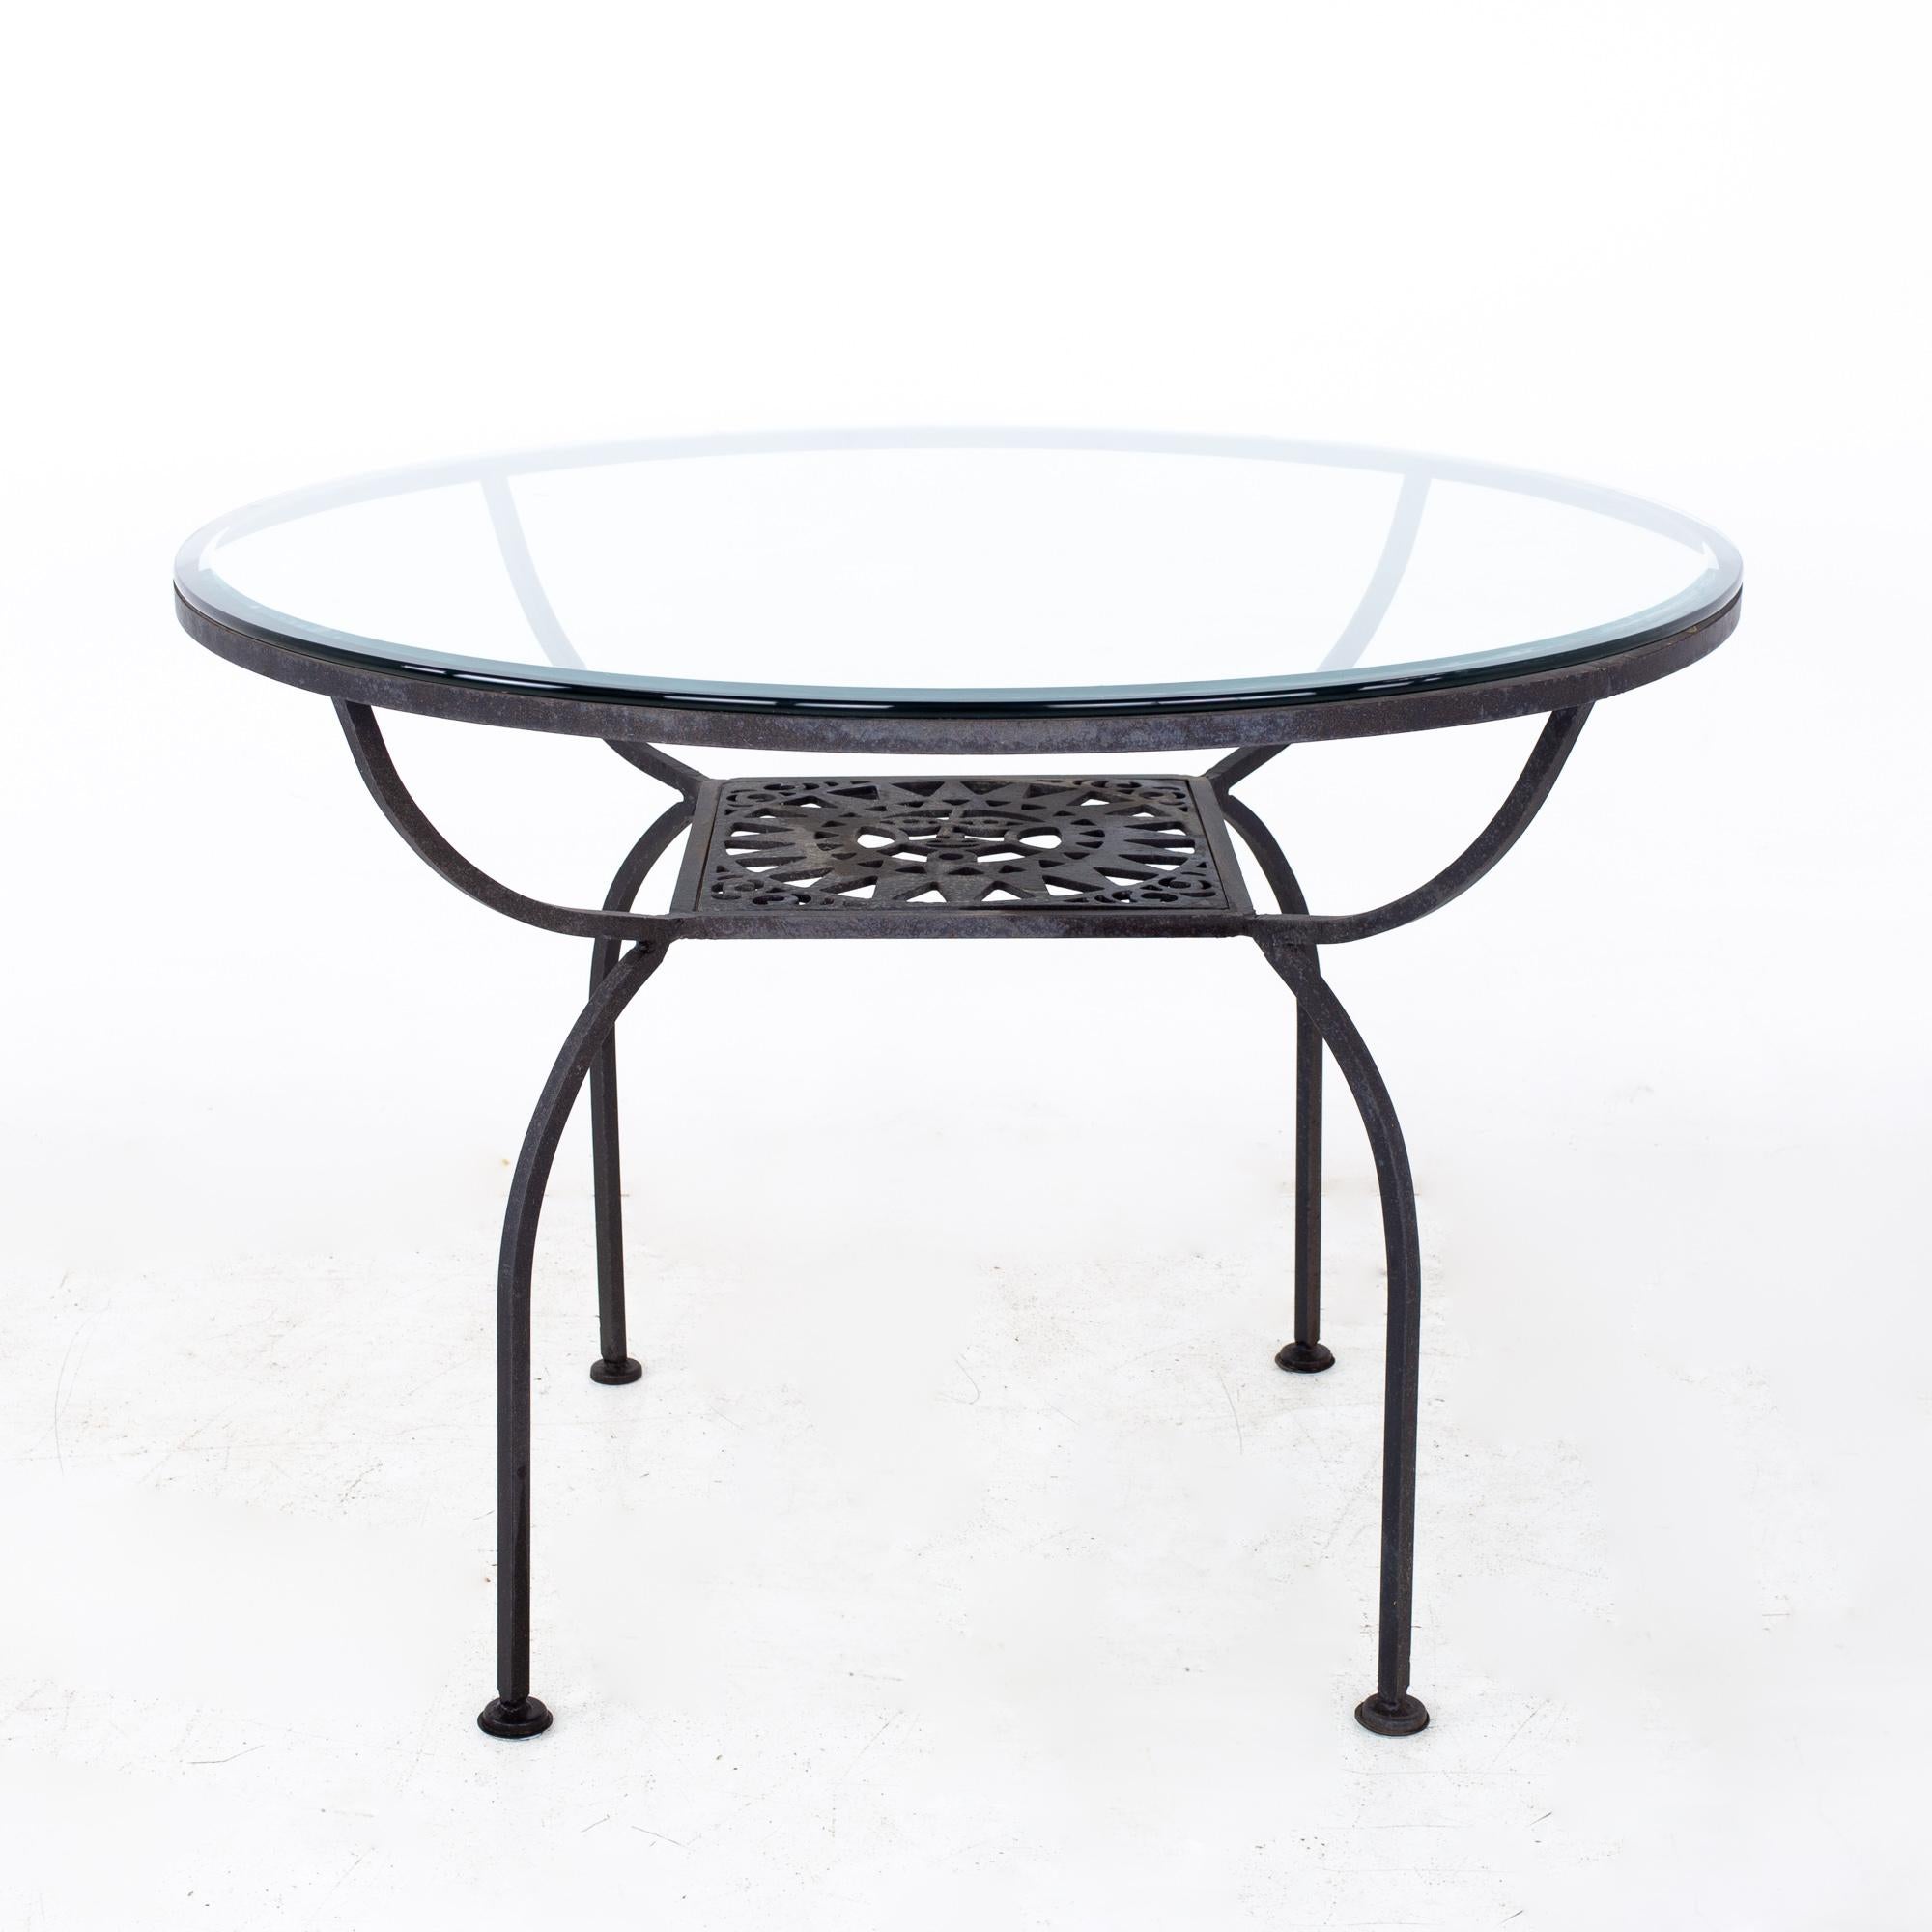 Arthur Umanoff for Shaver Howard Mayan Mid Century Iron and Glass Round Dining Table

The table measures: 42 wide x 42 deep x 29.75 high, with a chair clearance of 28.5 inches

All pieces of furniture can be had in what we call restored vintage